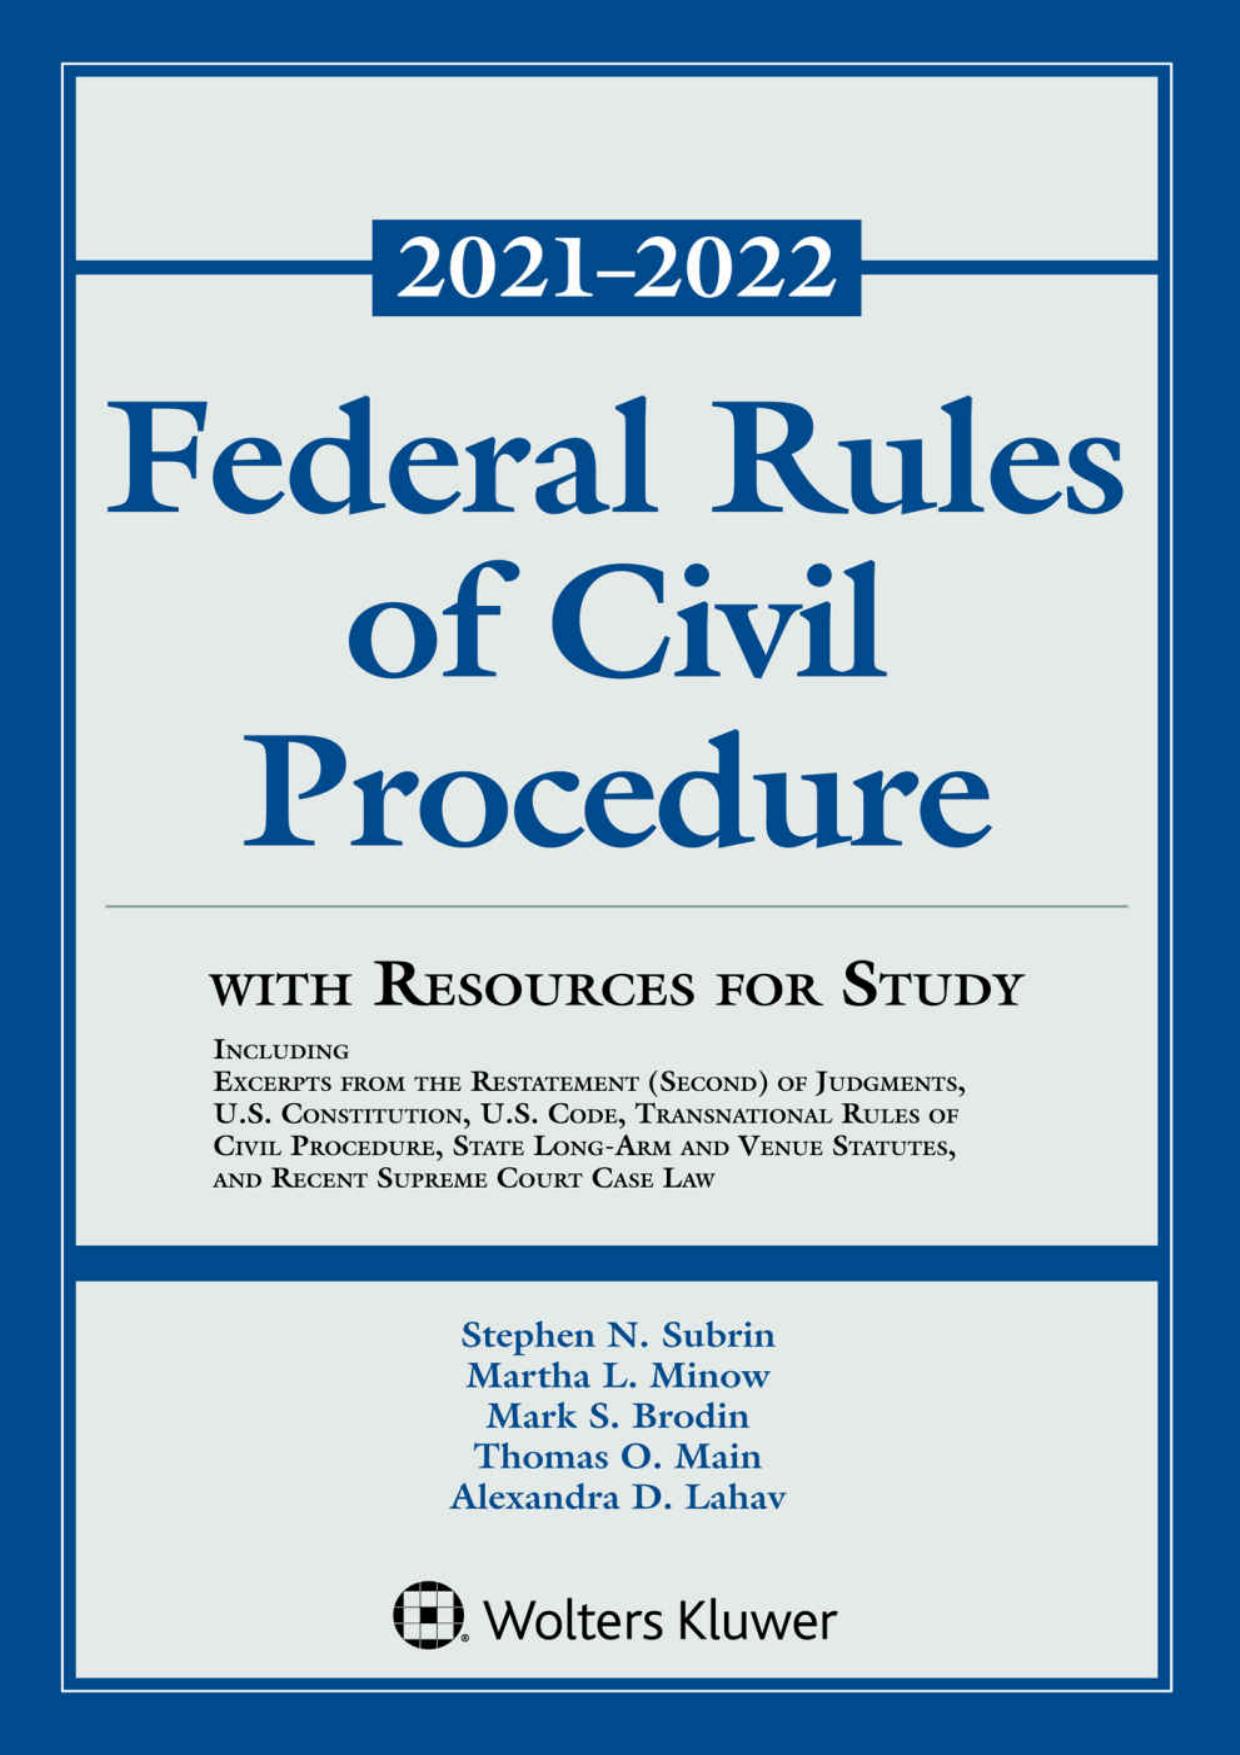 Federal Rules of Civil Procedure with Resources for Study 20212022